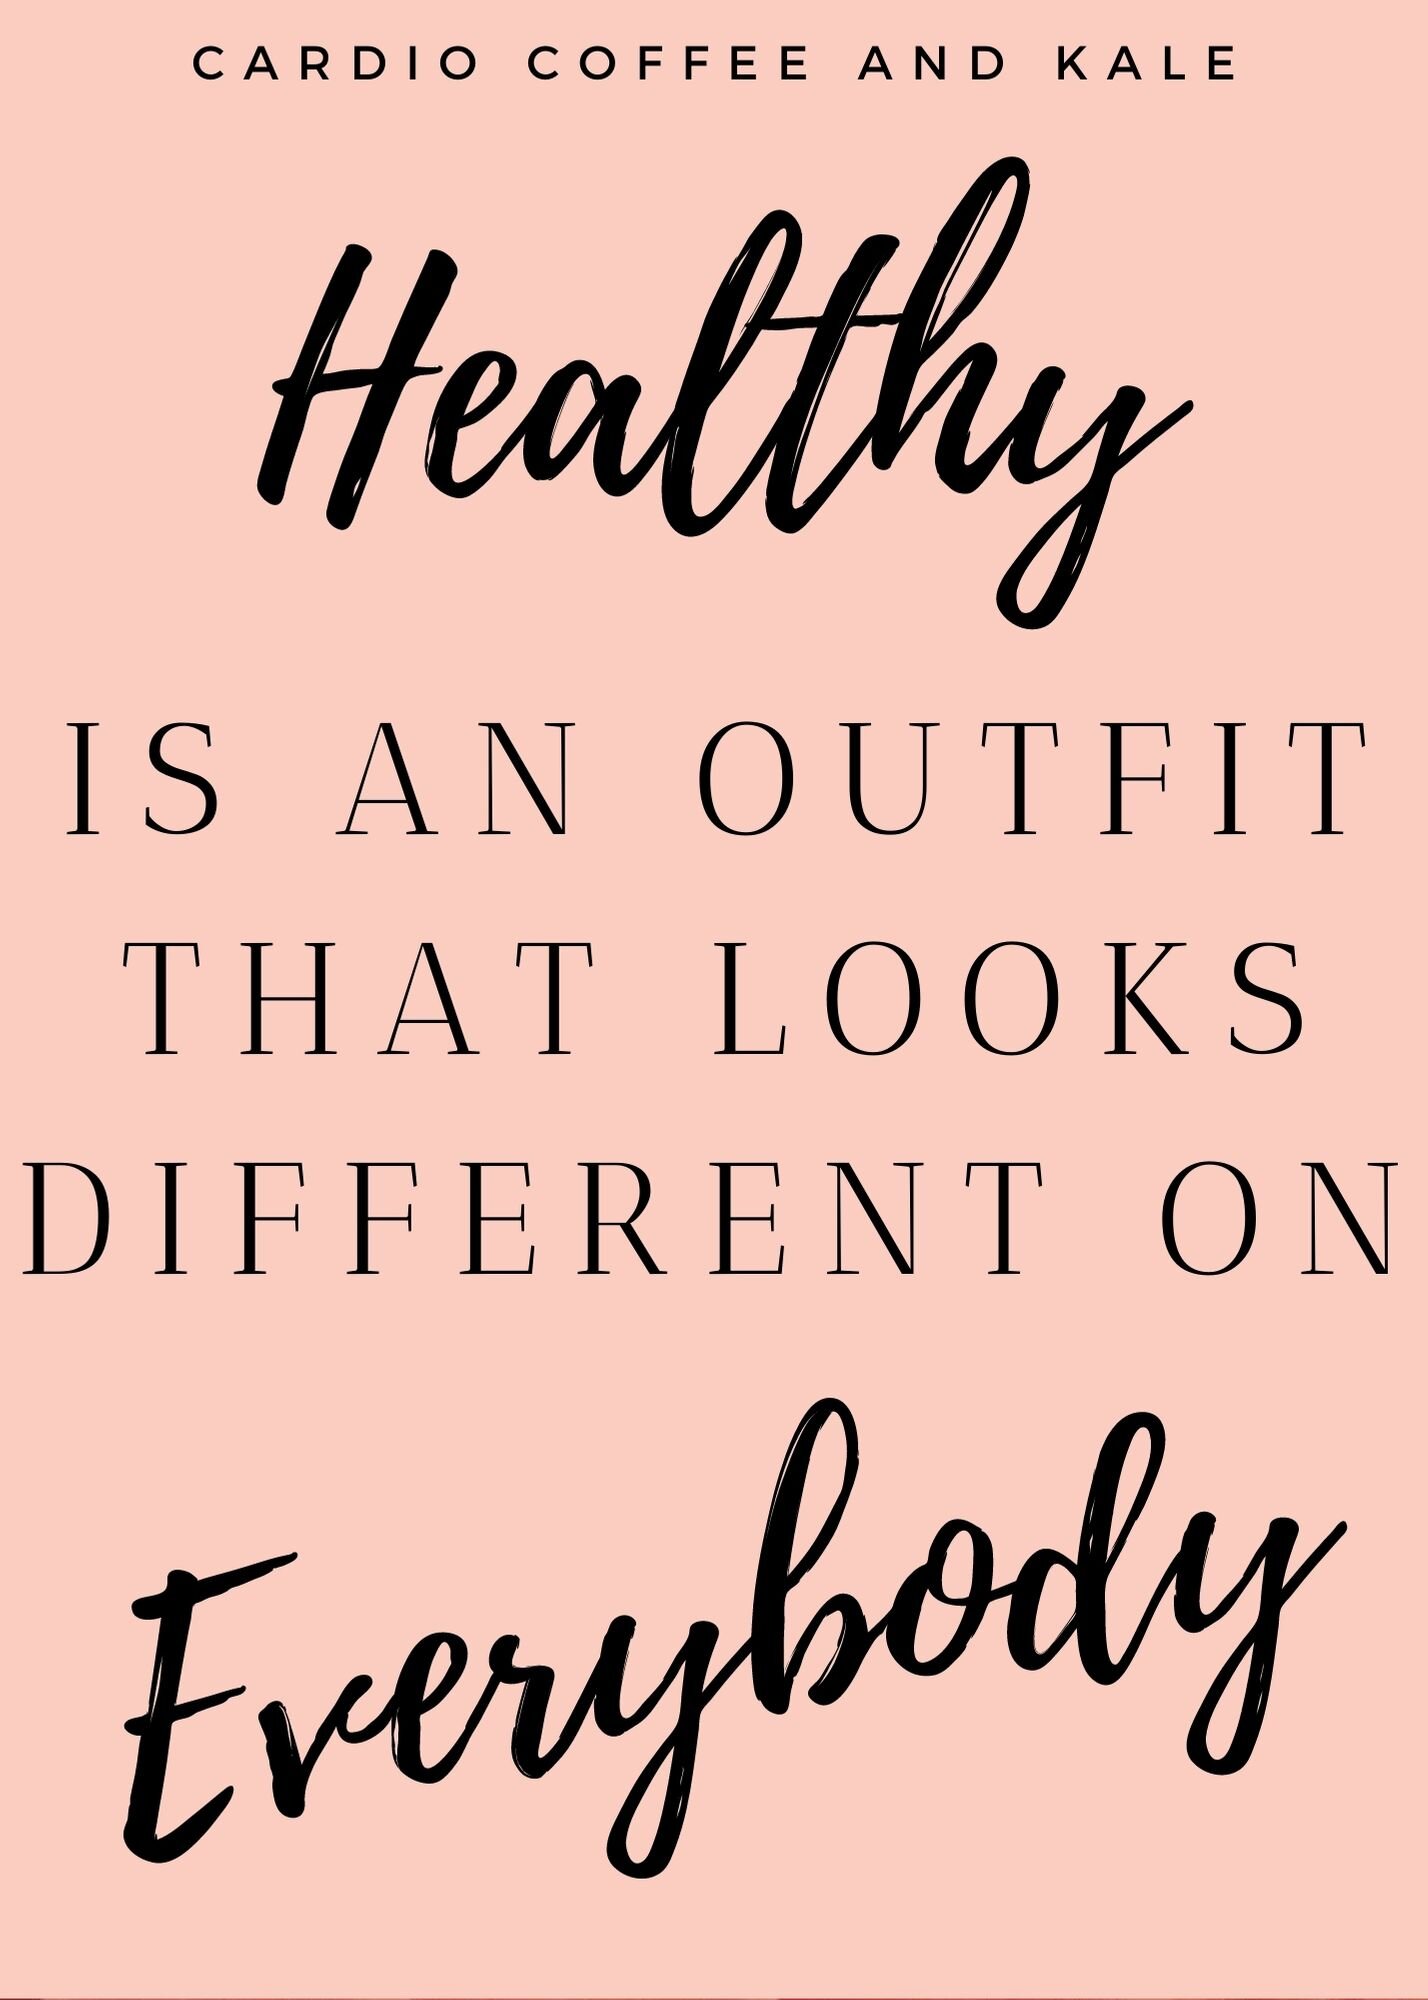 35 Inspirational Health and Fitness Quotes to Print or Pin